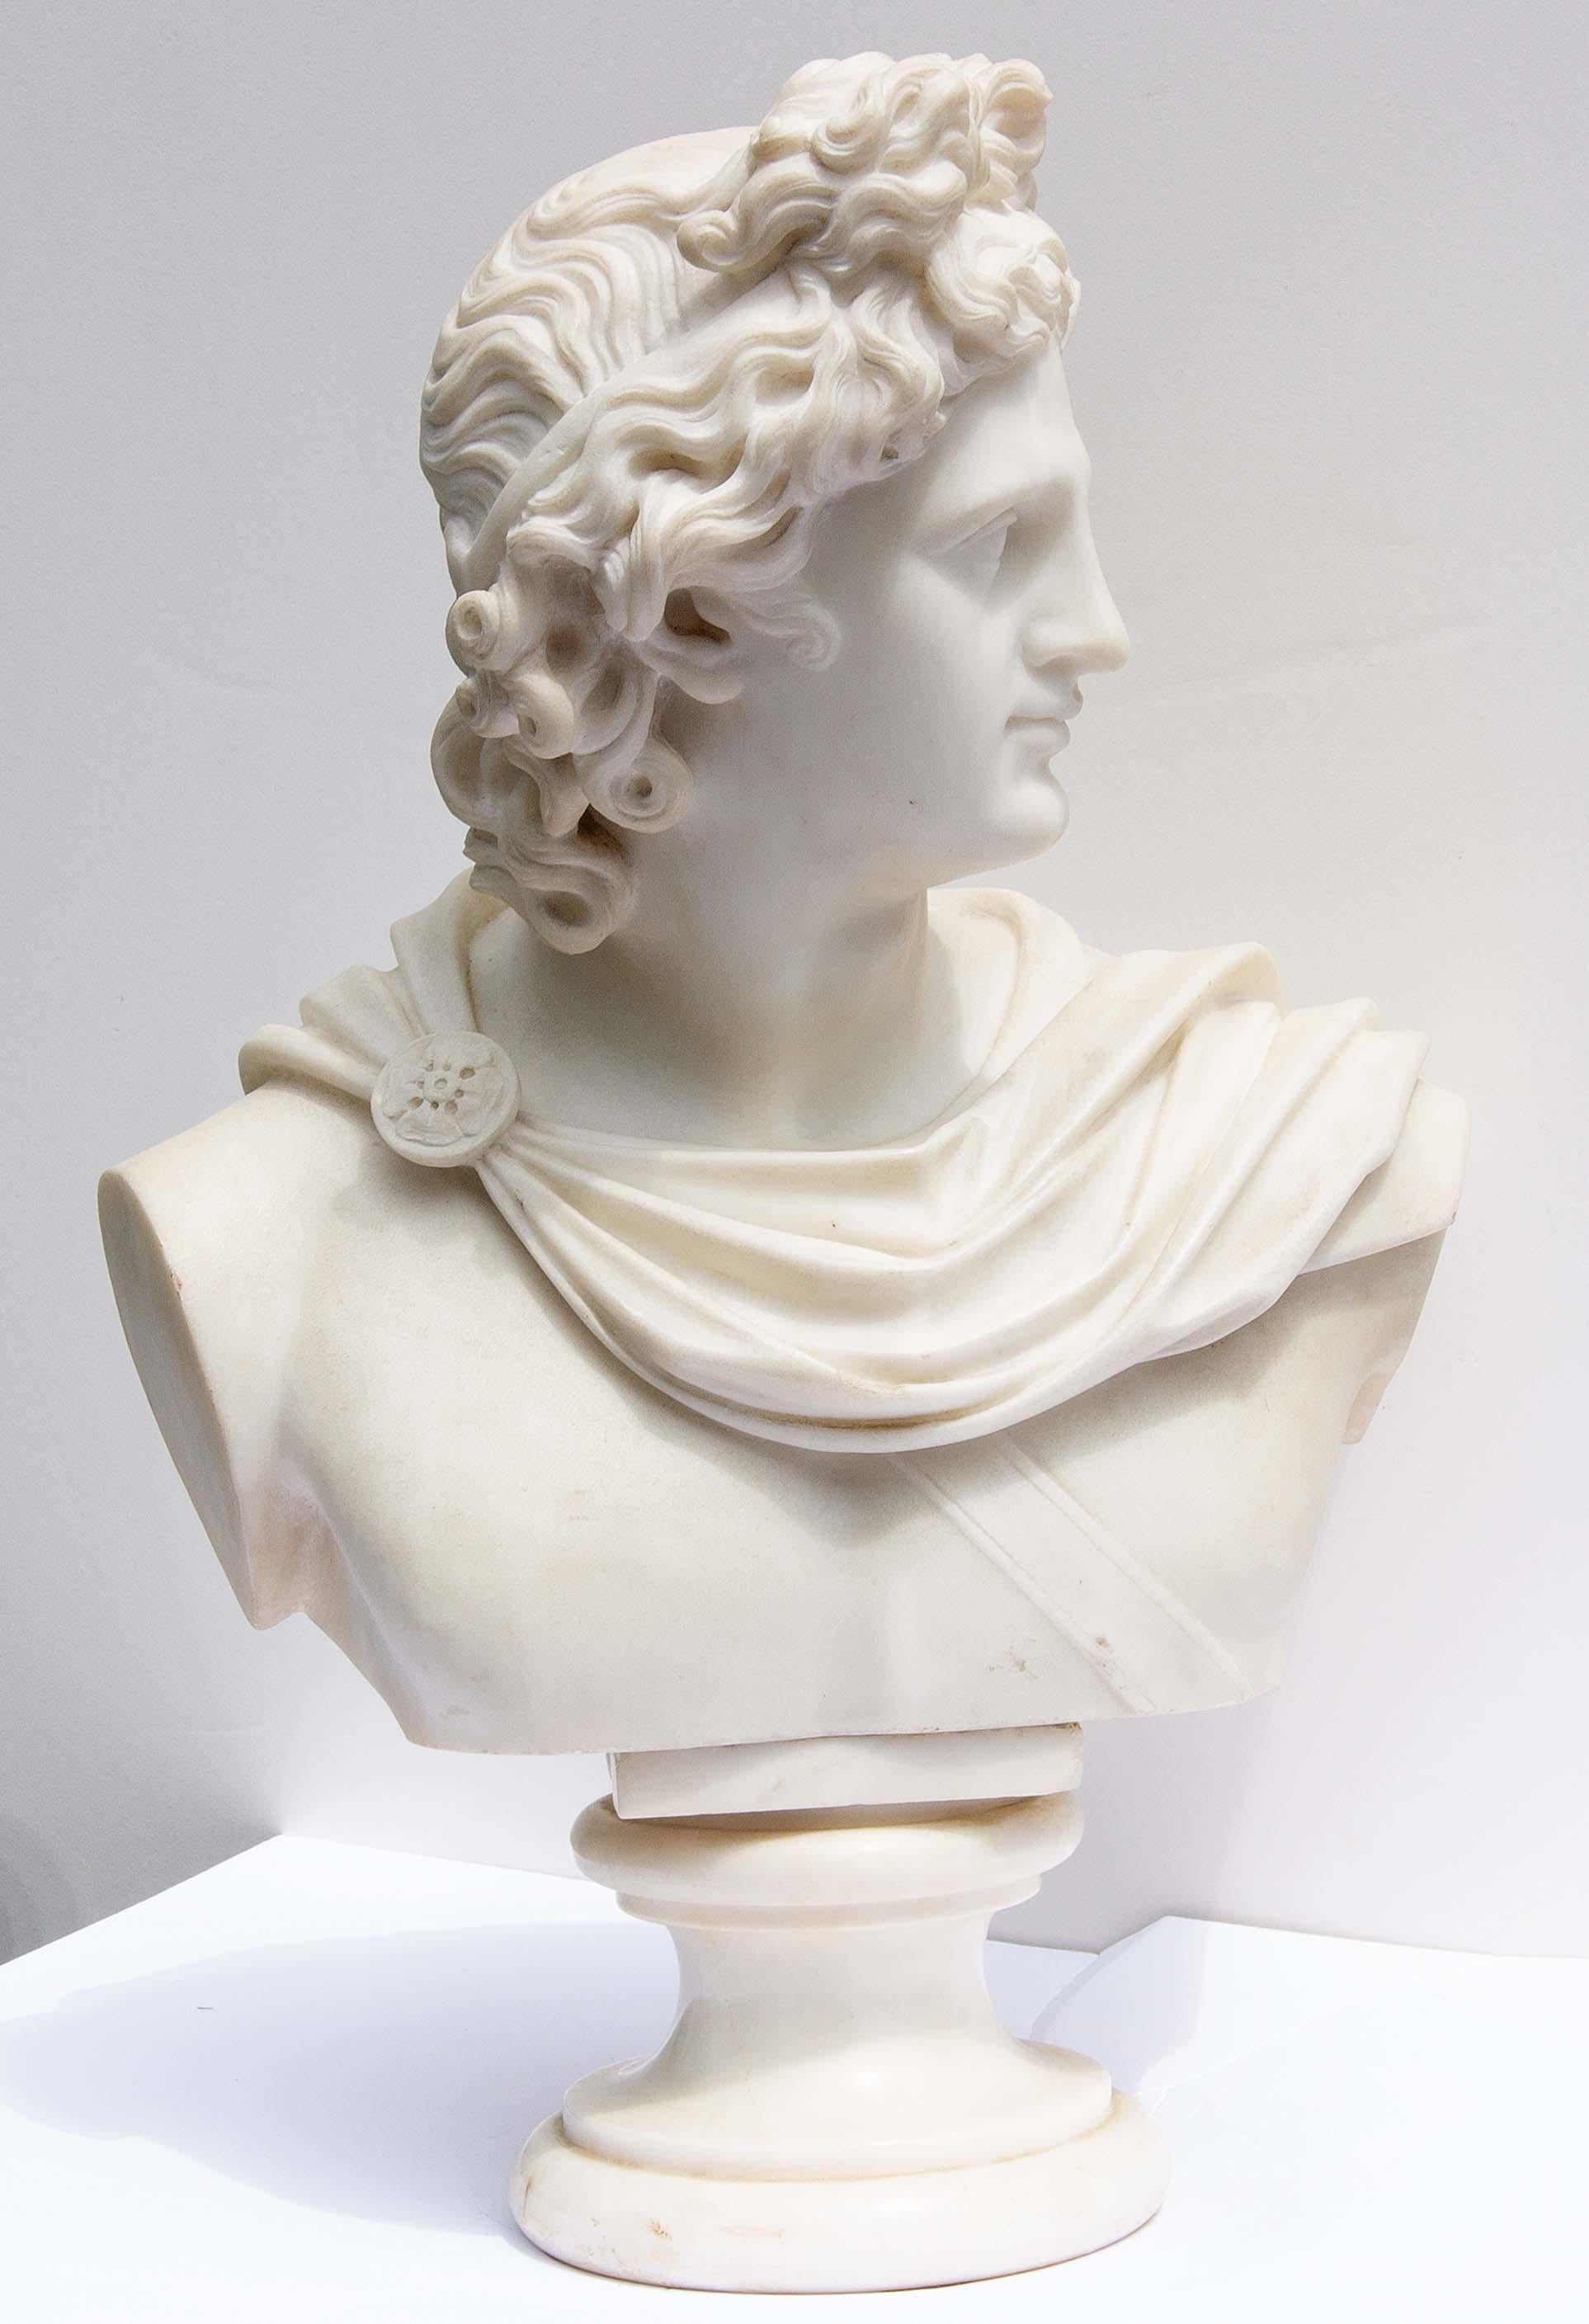 Antique bust of Apollo of Belvedere. Finely carved carrara marble. Mid-19th century. Italian.
Presented by Joseph Dasta Antiques



































































# nude male greek roman mercury statue sculpture